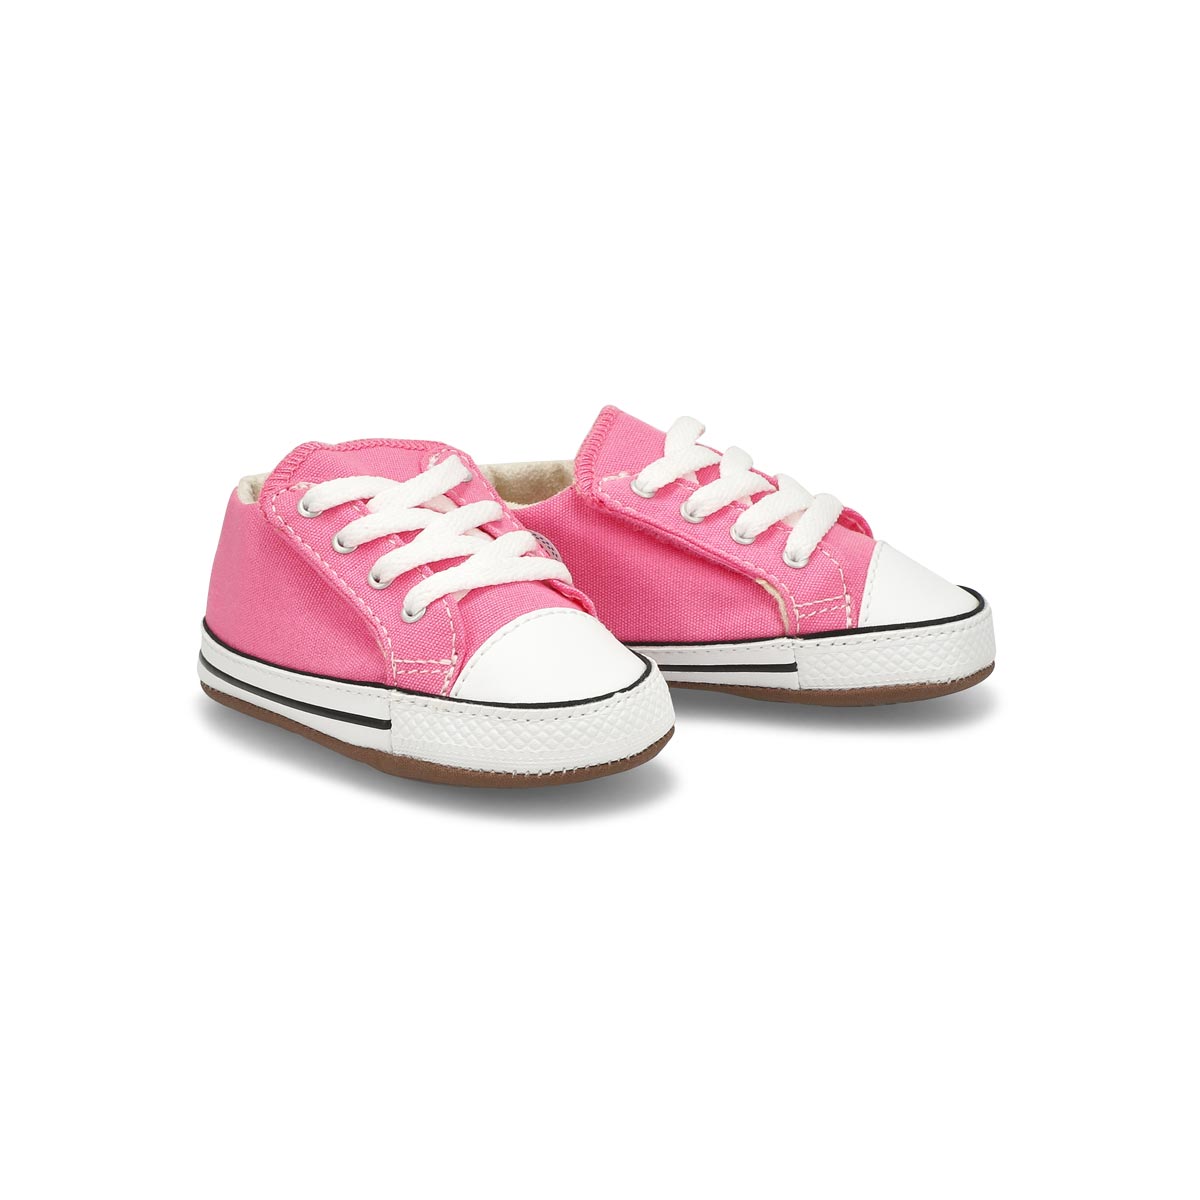 Infants' Chuck Taylor All Star Cribster Sneaker - Pink